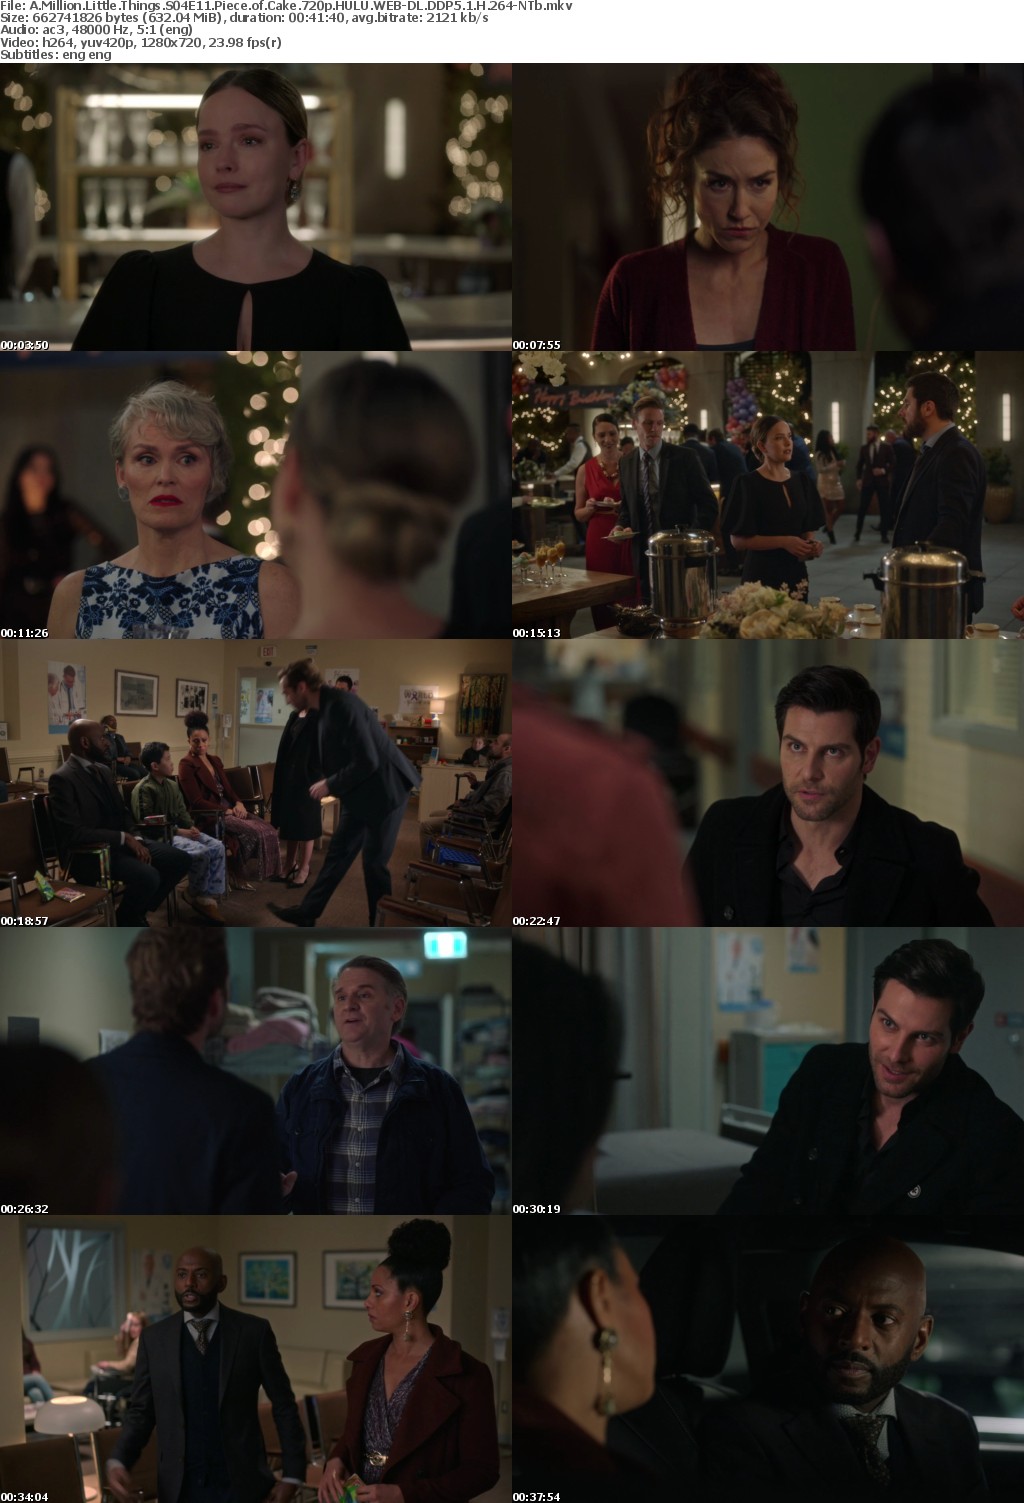 A Million Little Things S04E11 Piece of Cake 720p HULU WEB-DL DDP5 1 H 264-NTb